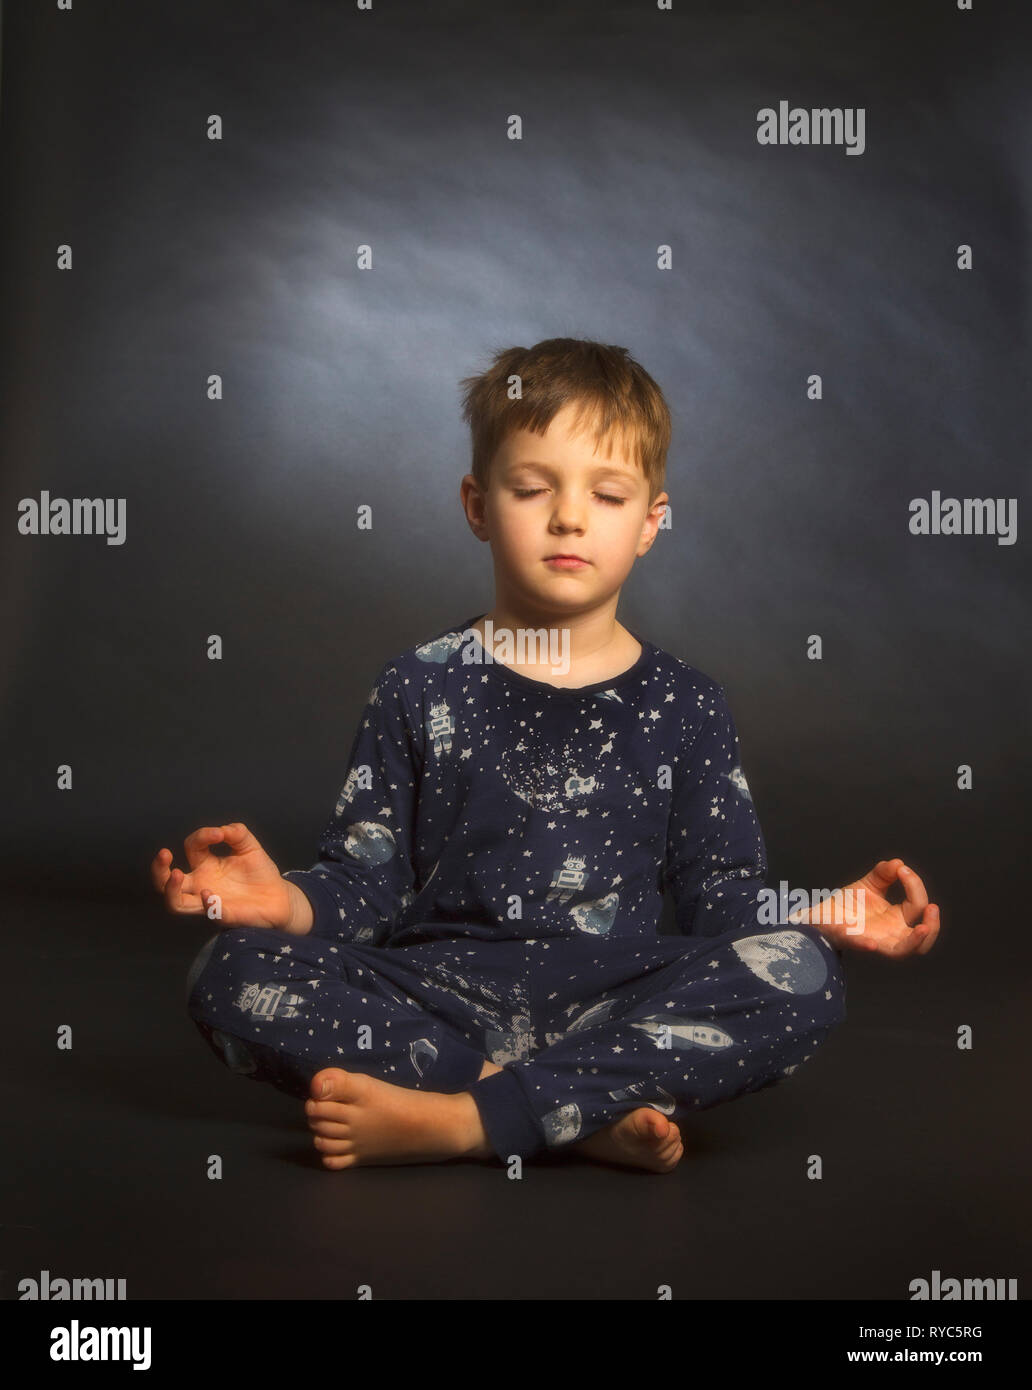 A 5 year old boy practicing yoga Stock Photo